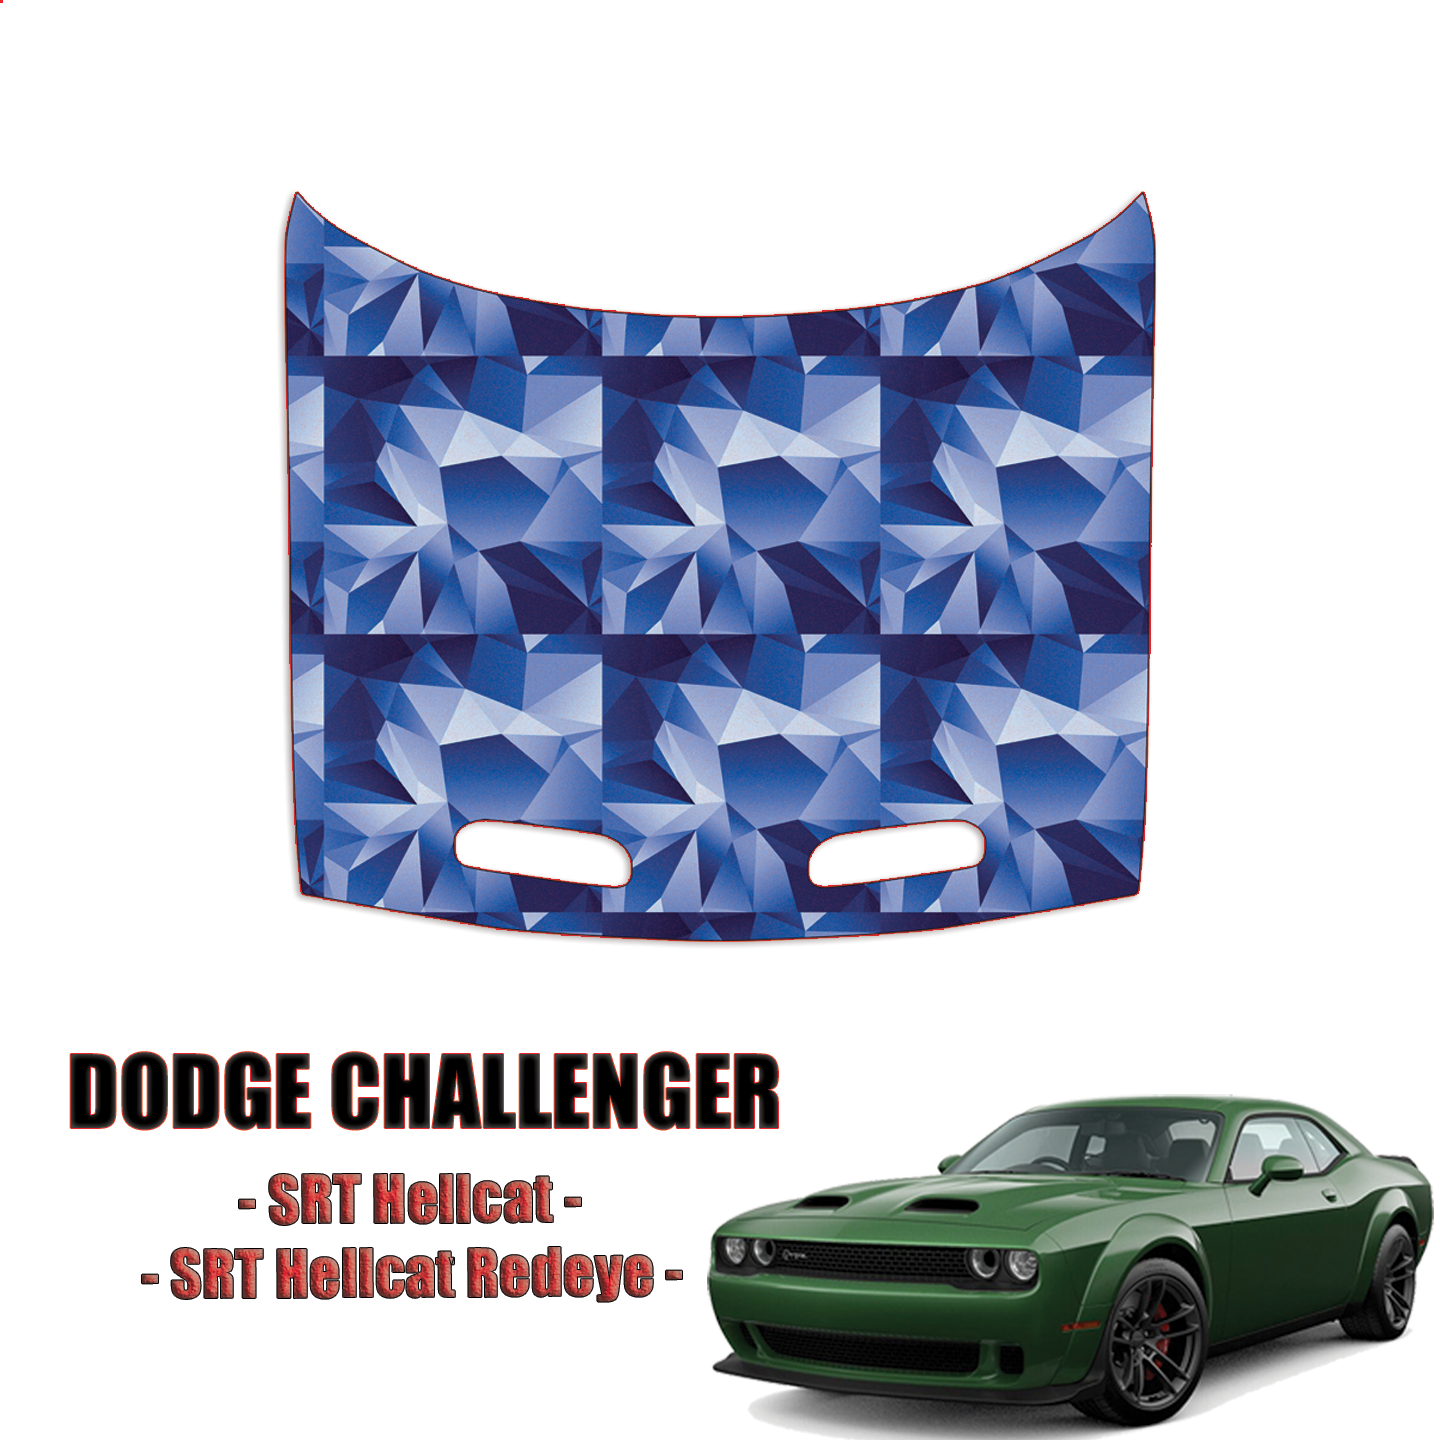 Challenger Hellcat Redeye - Full Paint Protection Film Clear Bra